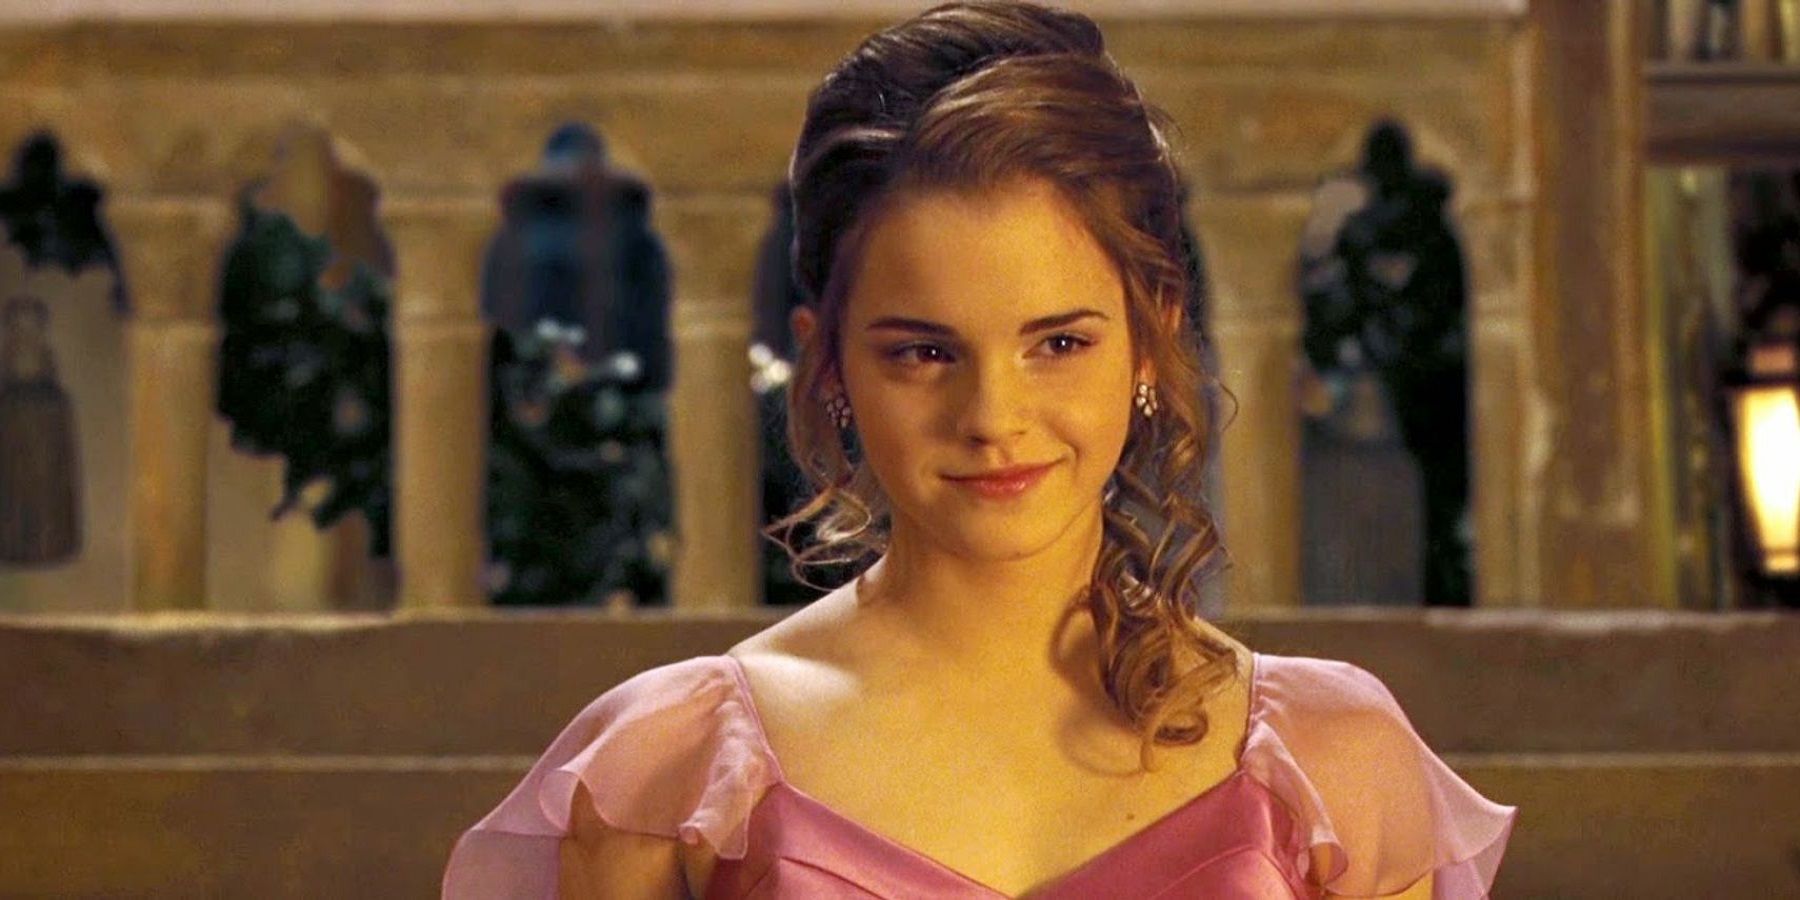 Harry Potter 10 Facts About Hermione They Leave Out in the Movies